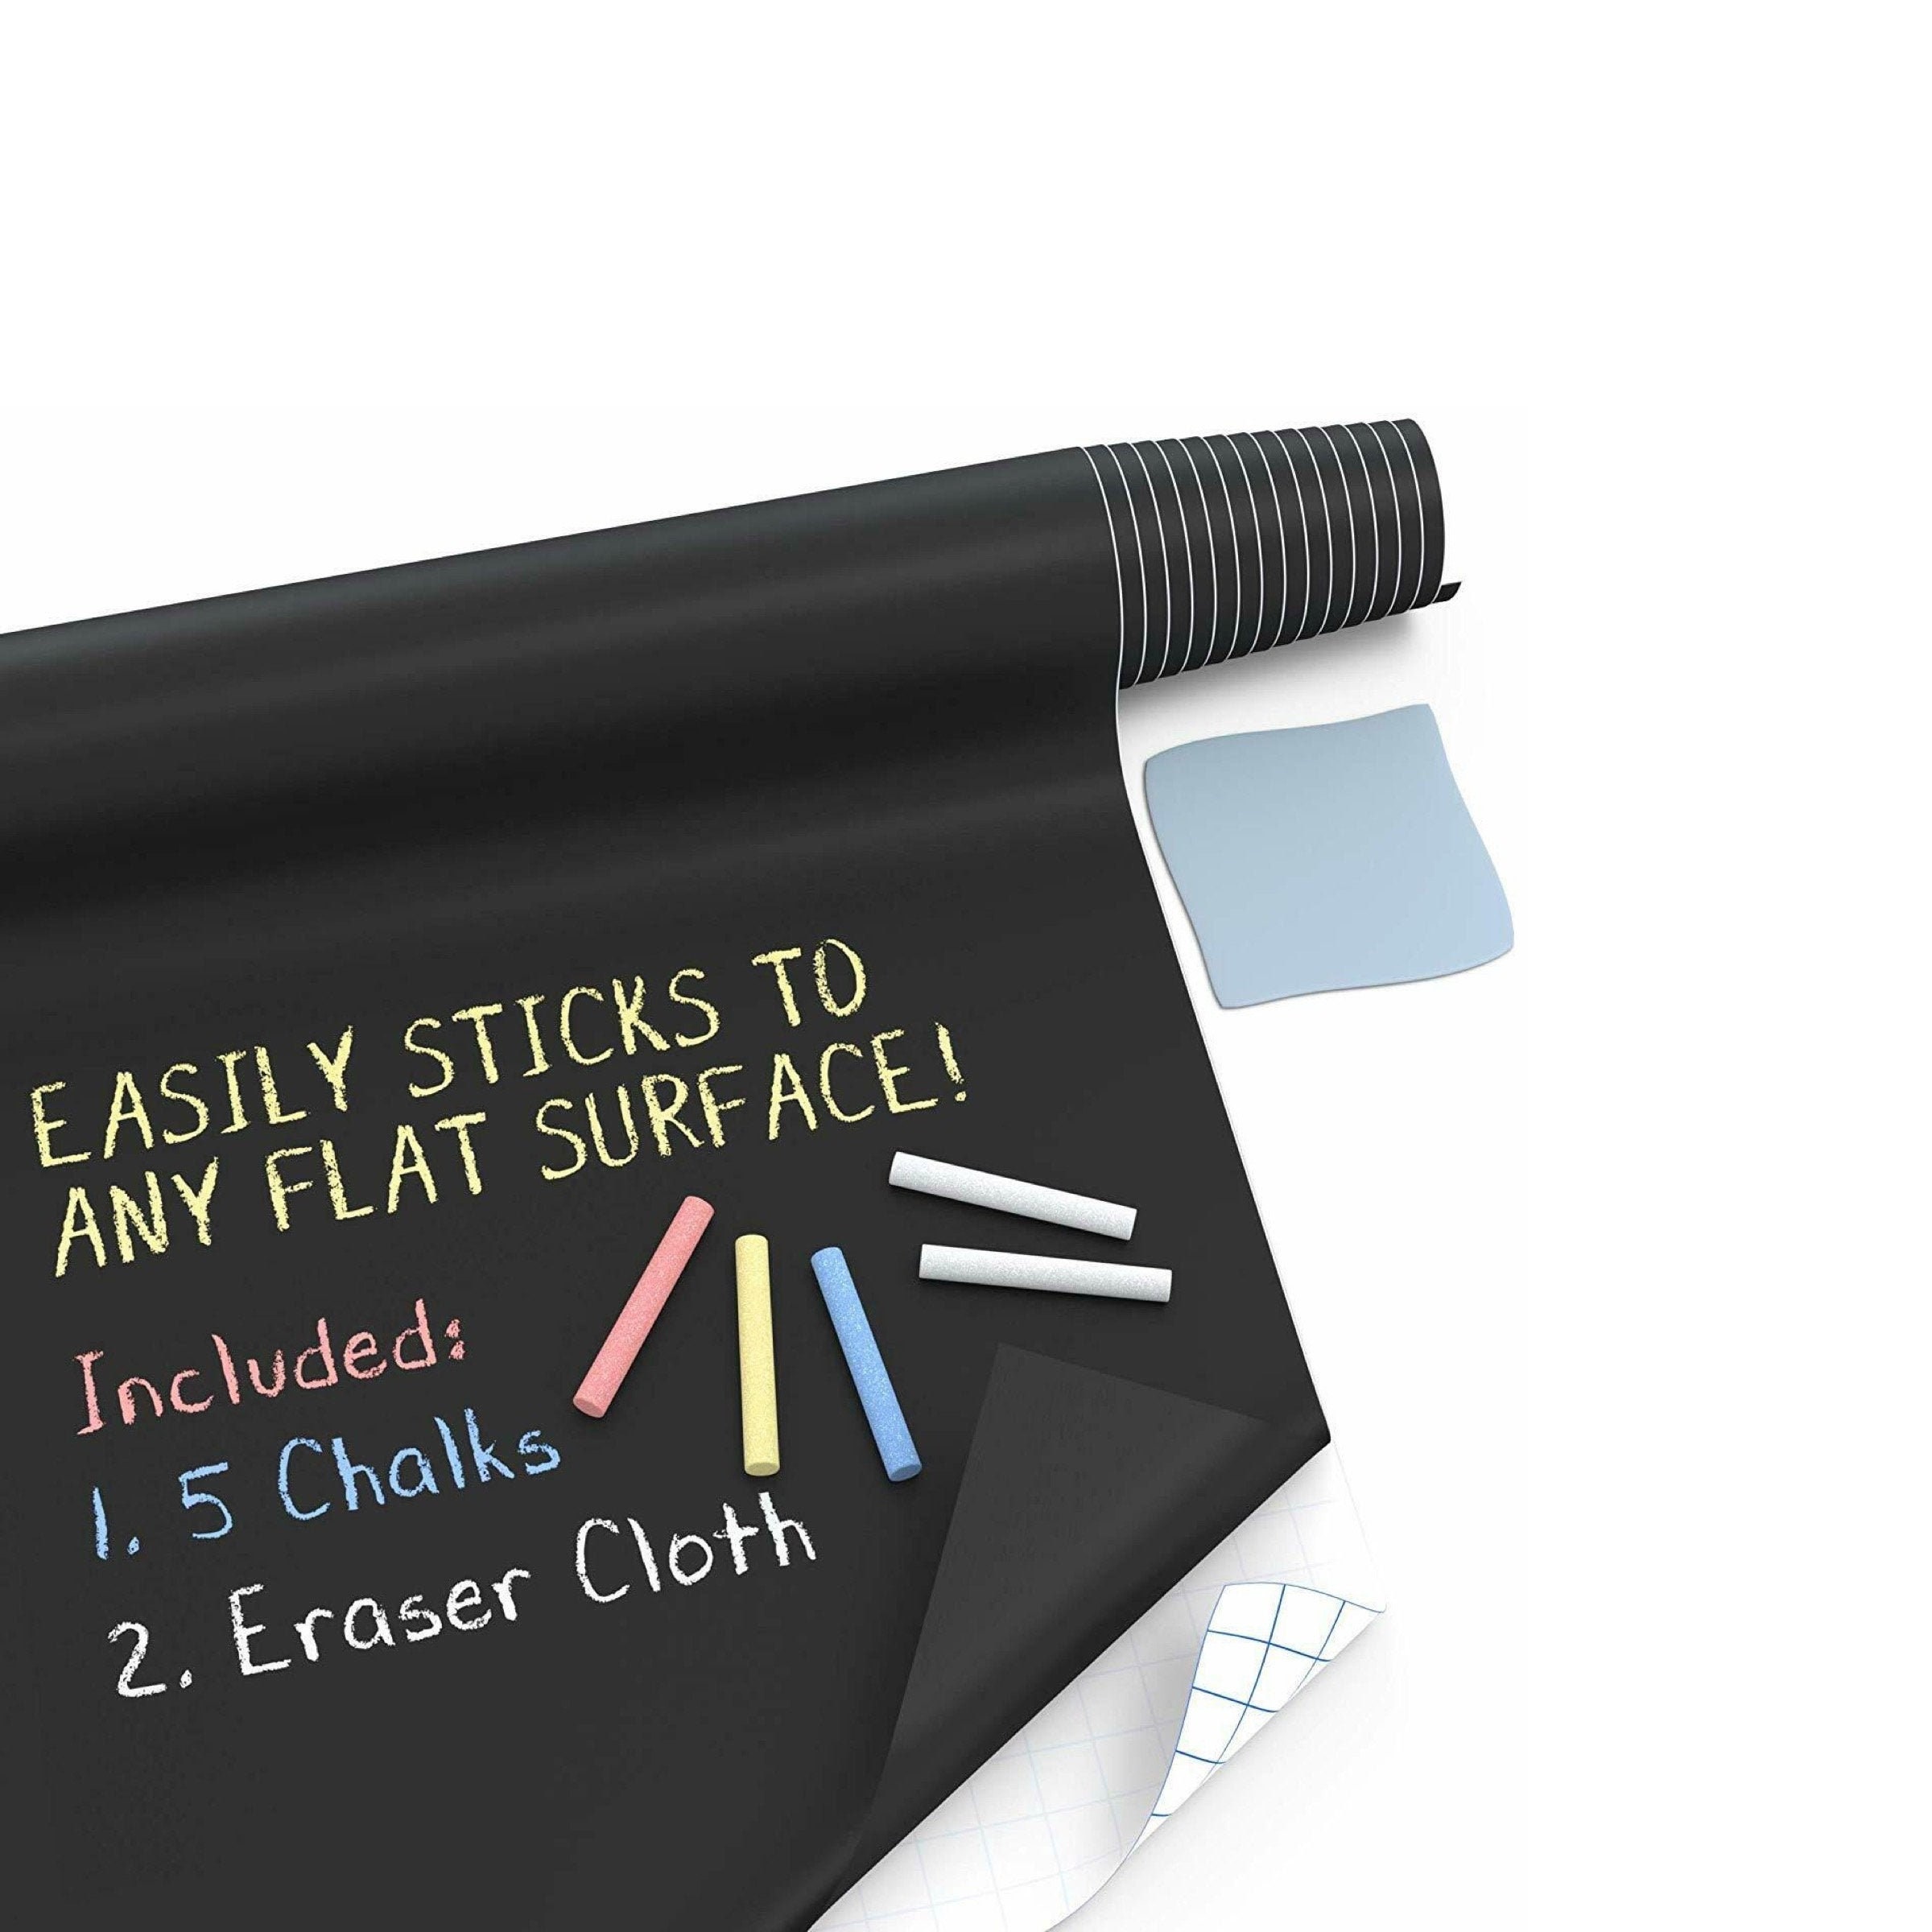 Chalkboard Wallpaper Stick and Peel - Chalk Board Contact Paper Wall  Sticker Self Adhesive Removable Vinyl Chalkboard Signs with 10 Colorful  Chalks